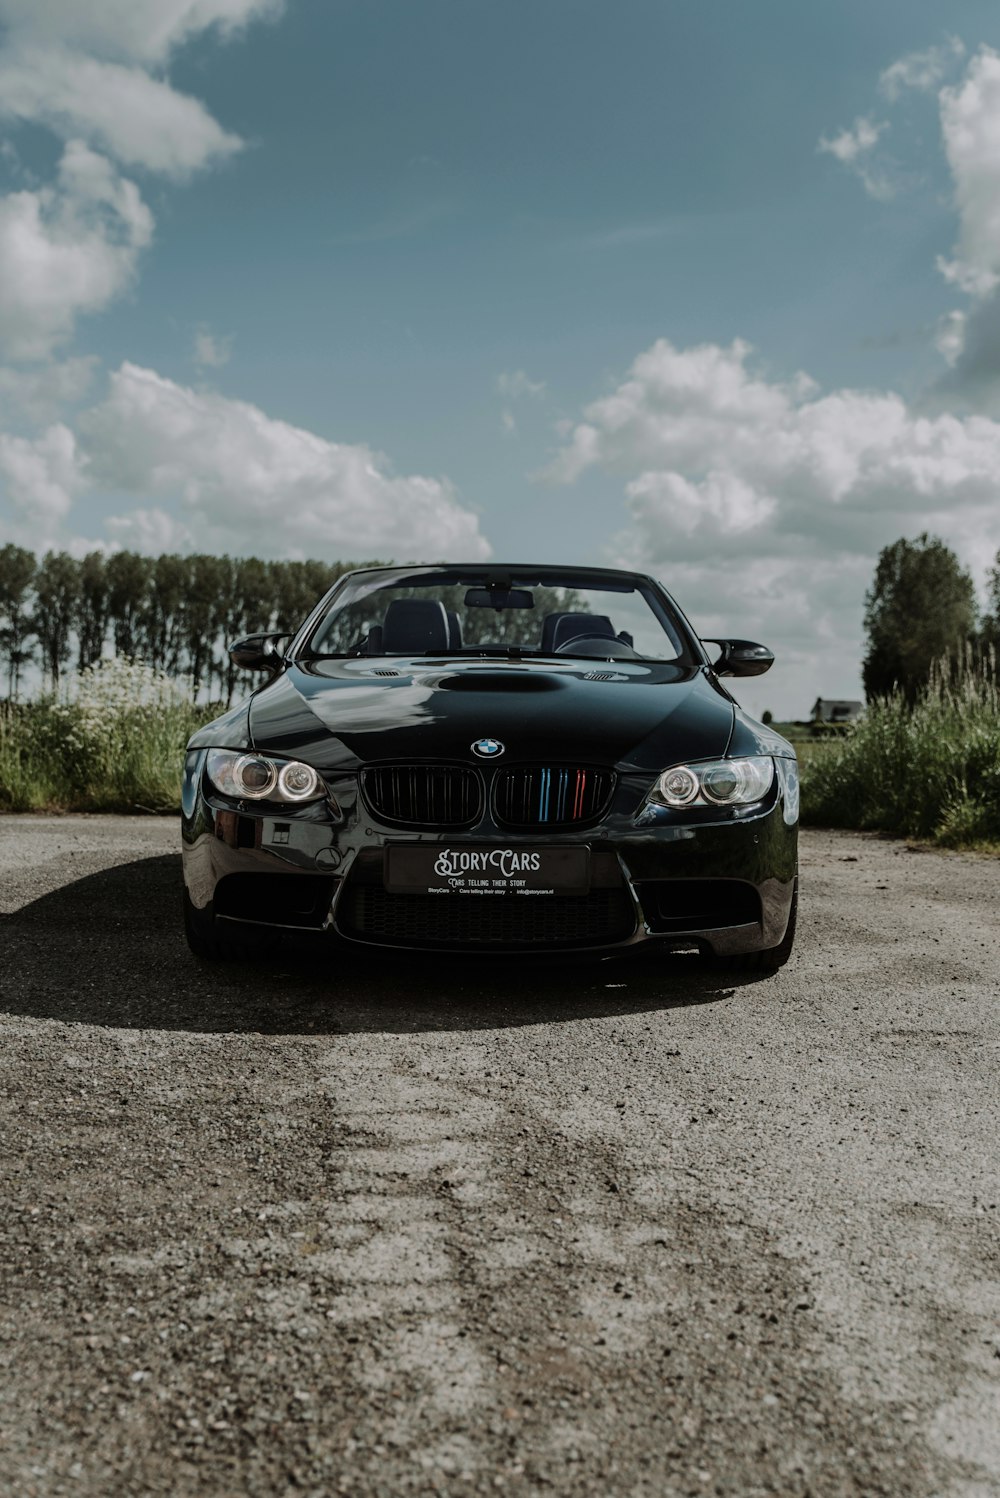 black bmw m 3 coupe parked on dirt road during daytime